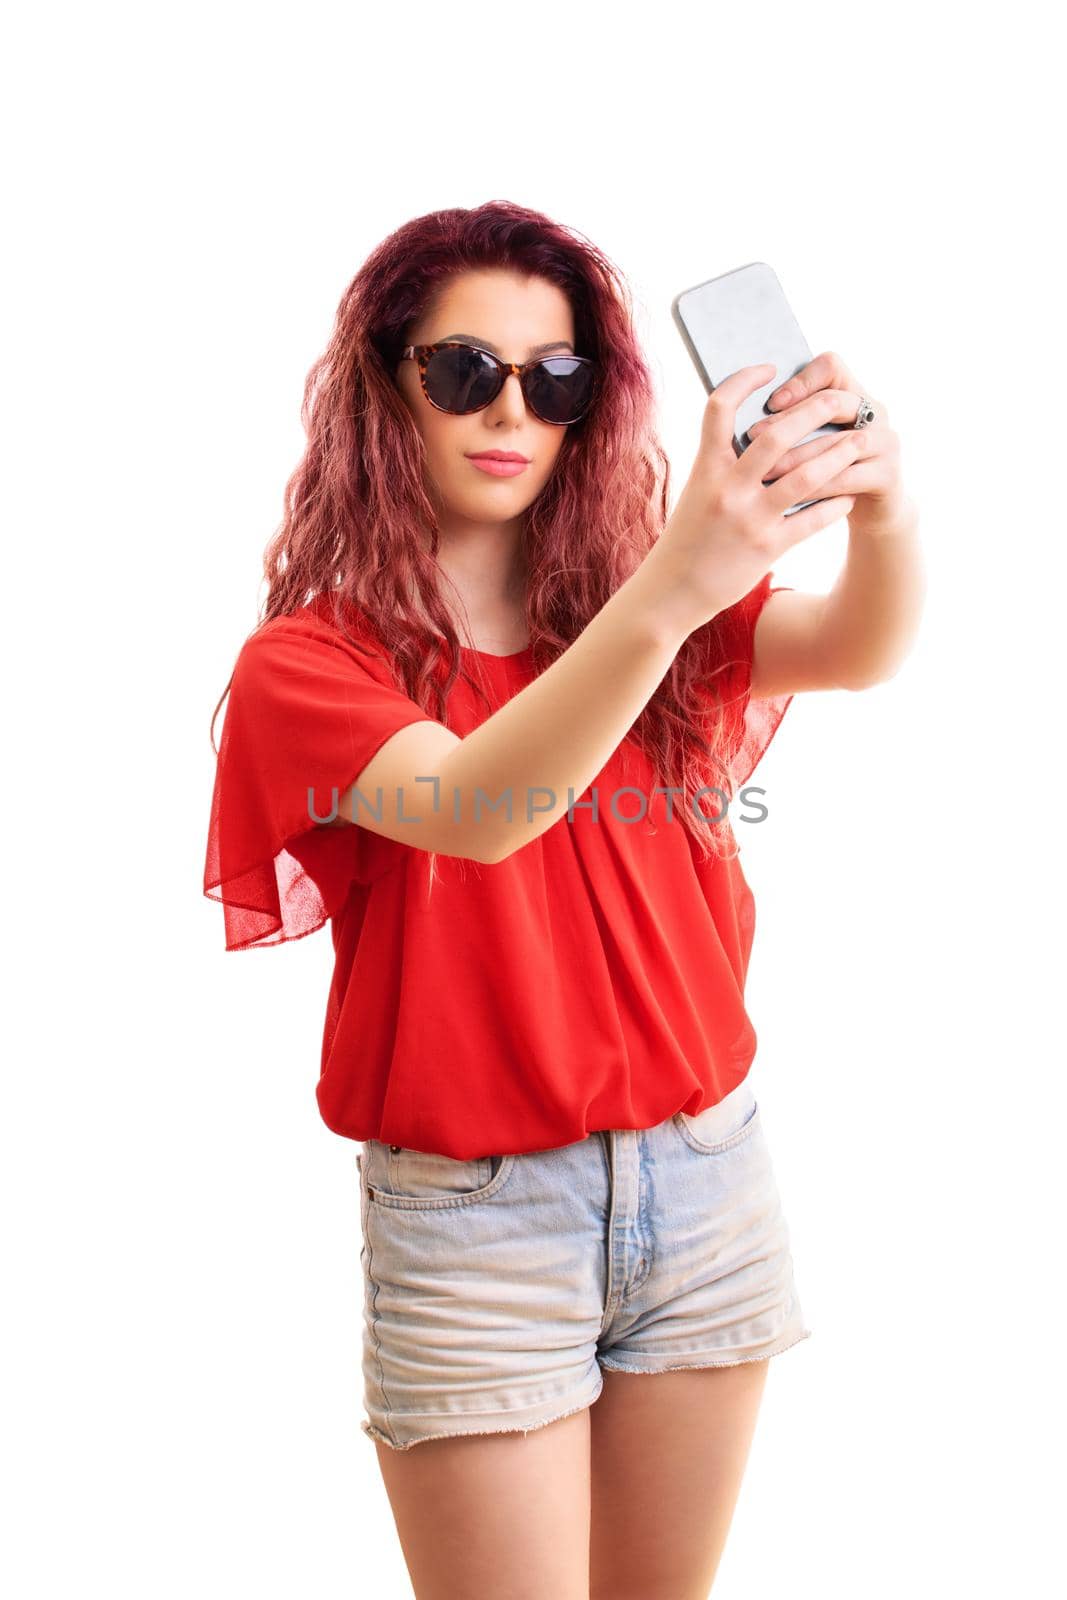 Fashionable young woman with sunglasses taking a selfie by Mendelex